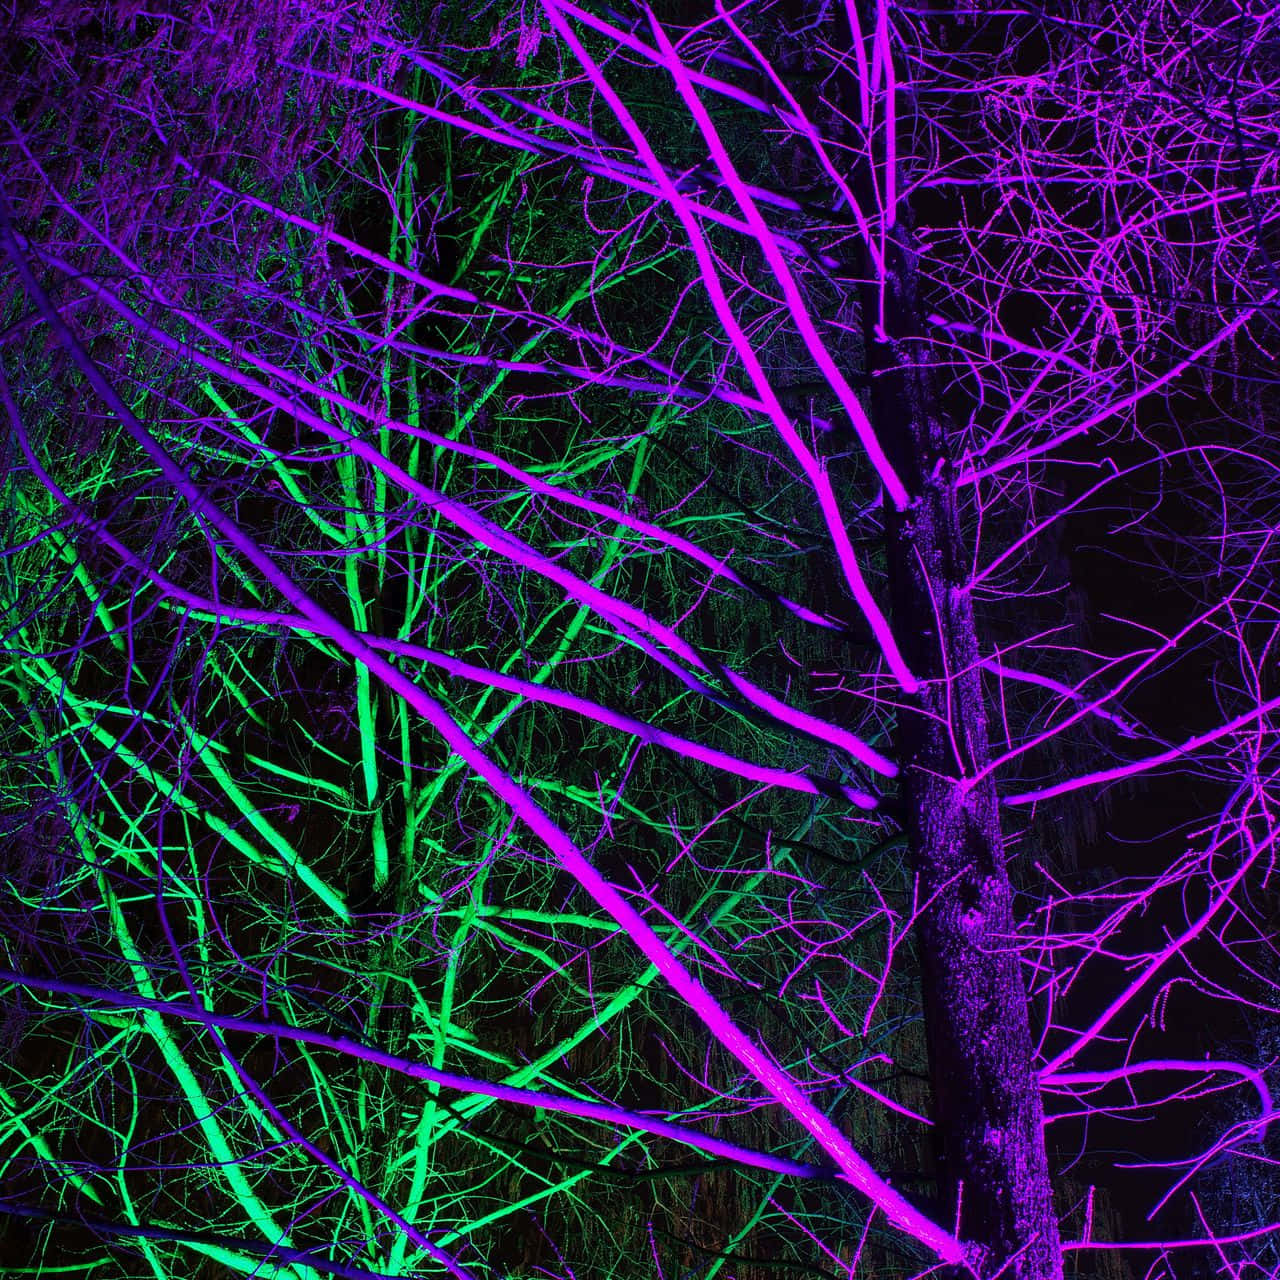 A hypnotizing image of bright neon green and purple. Wallpaper